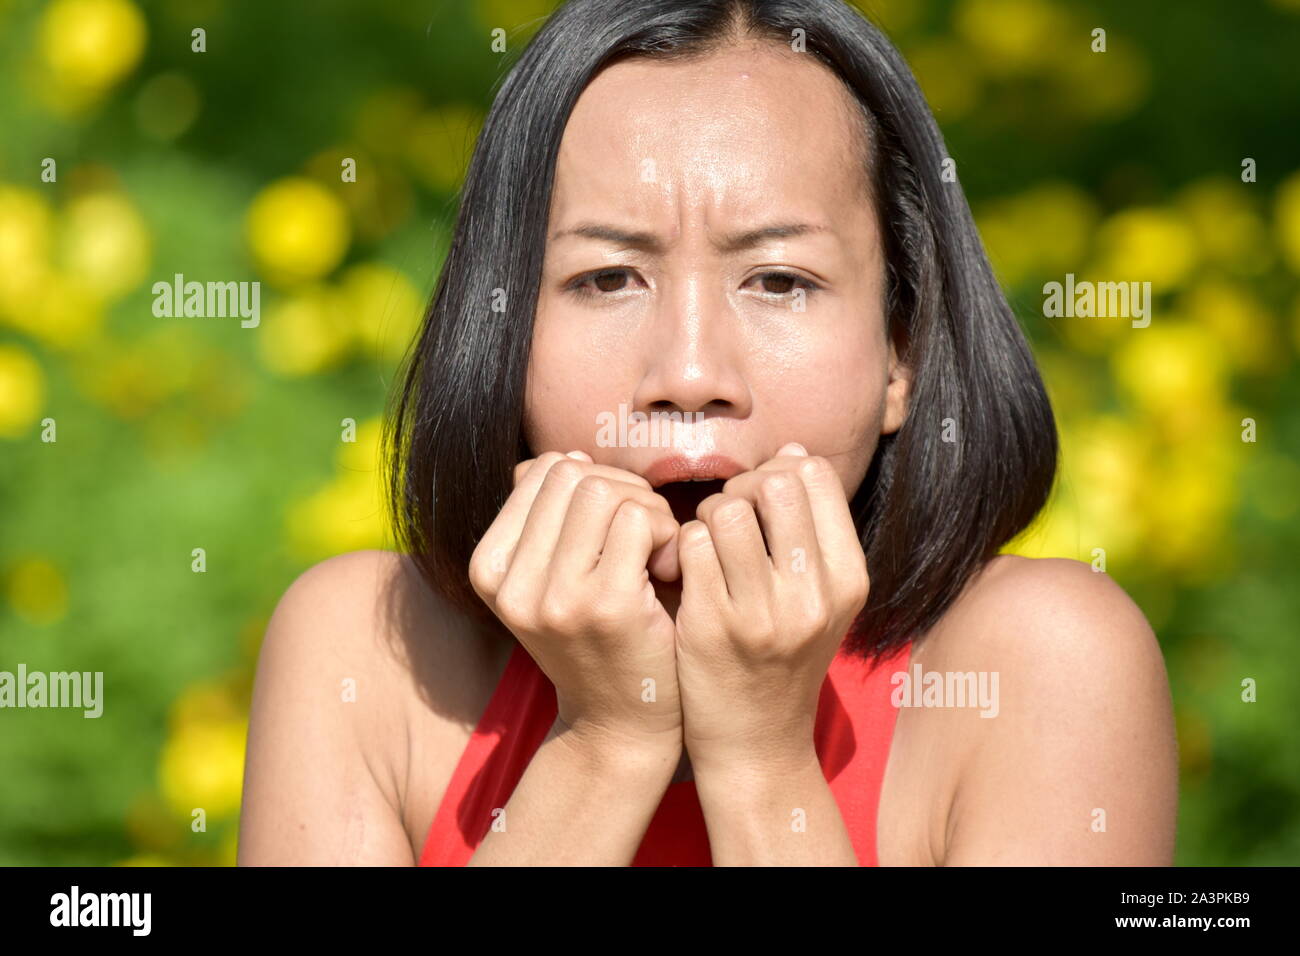 Scared face of woman Stock Photo by ©rainfall 49680905